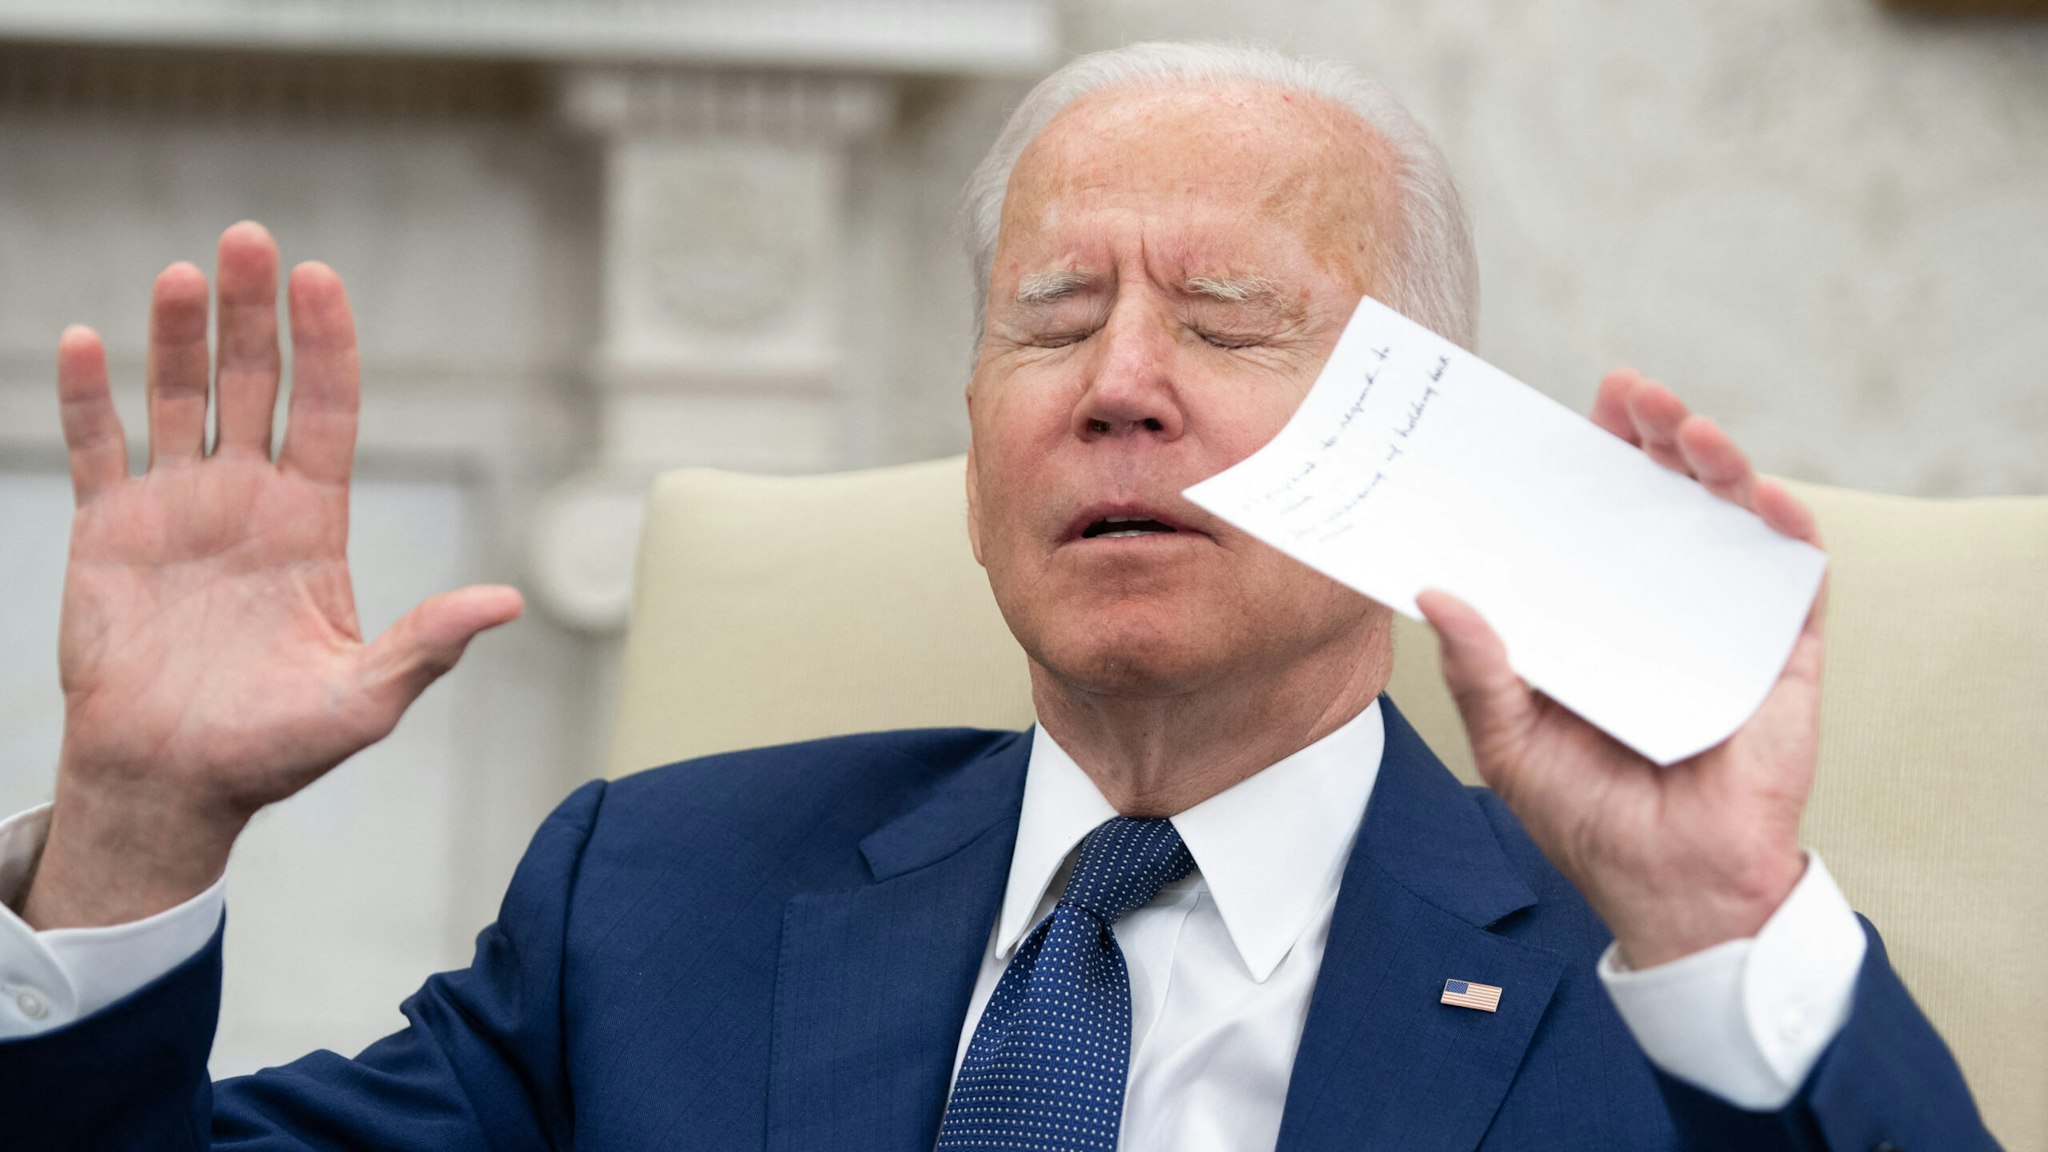 US President Joe Biden tries to get members of the media to stop shouting questions as he meets with Iraqi Prime Minister Mustafa Al-Kadhimi in the Oval Office of the White House in Washington, DC, July 26, 2021.